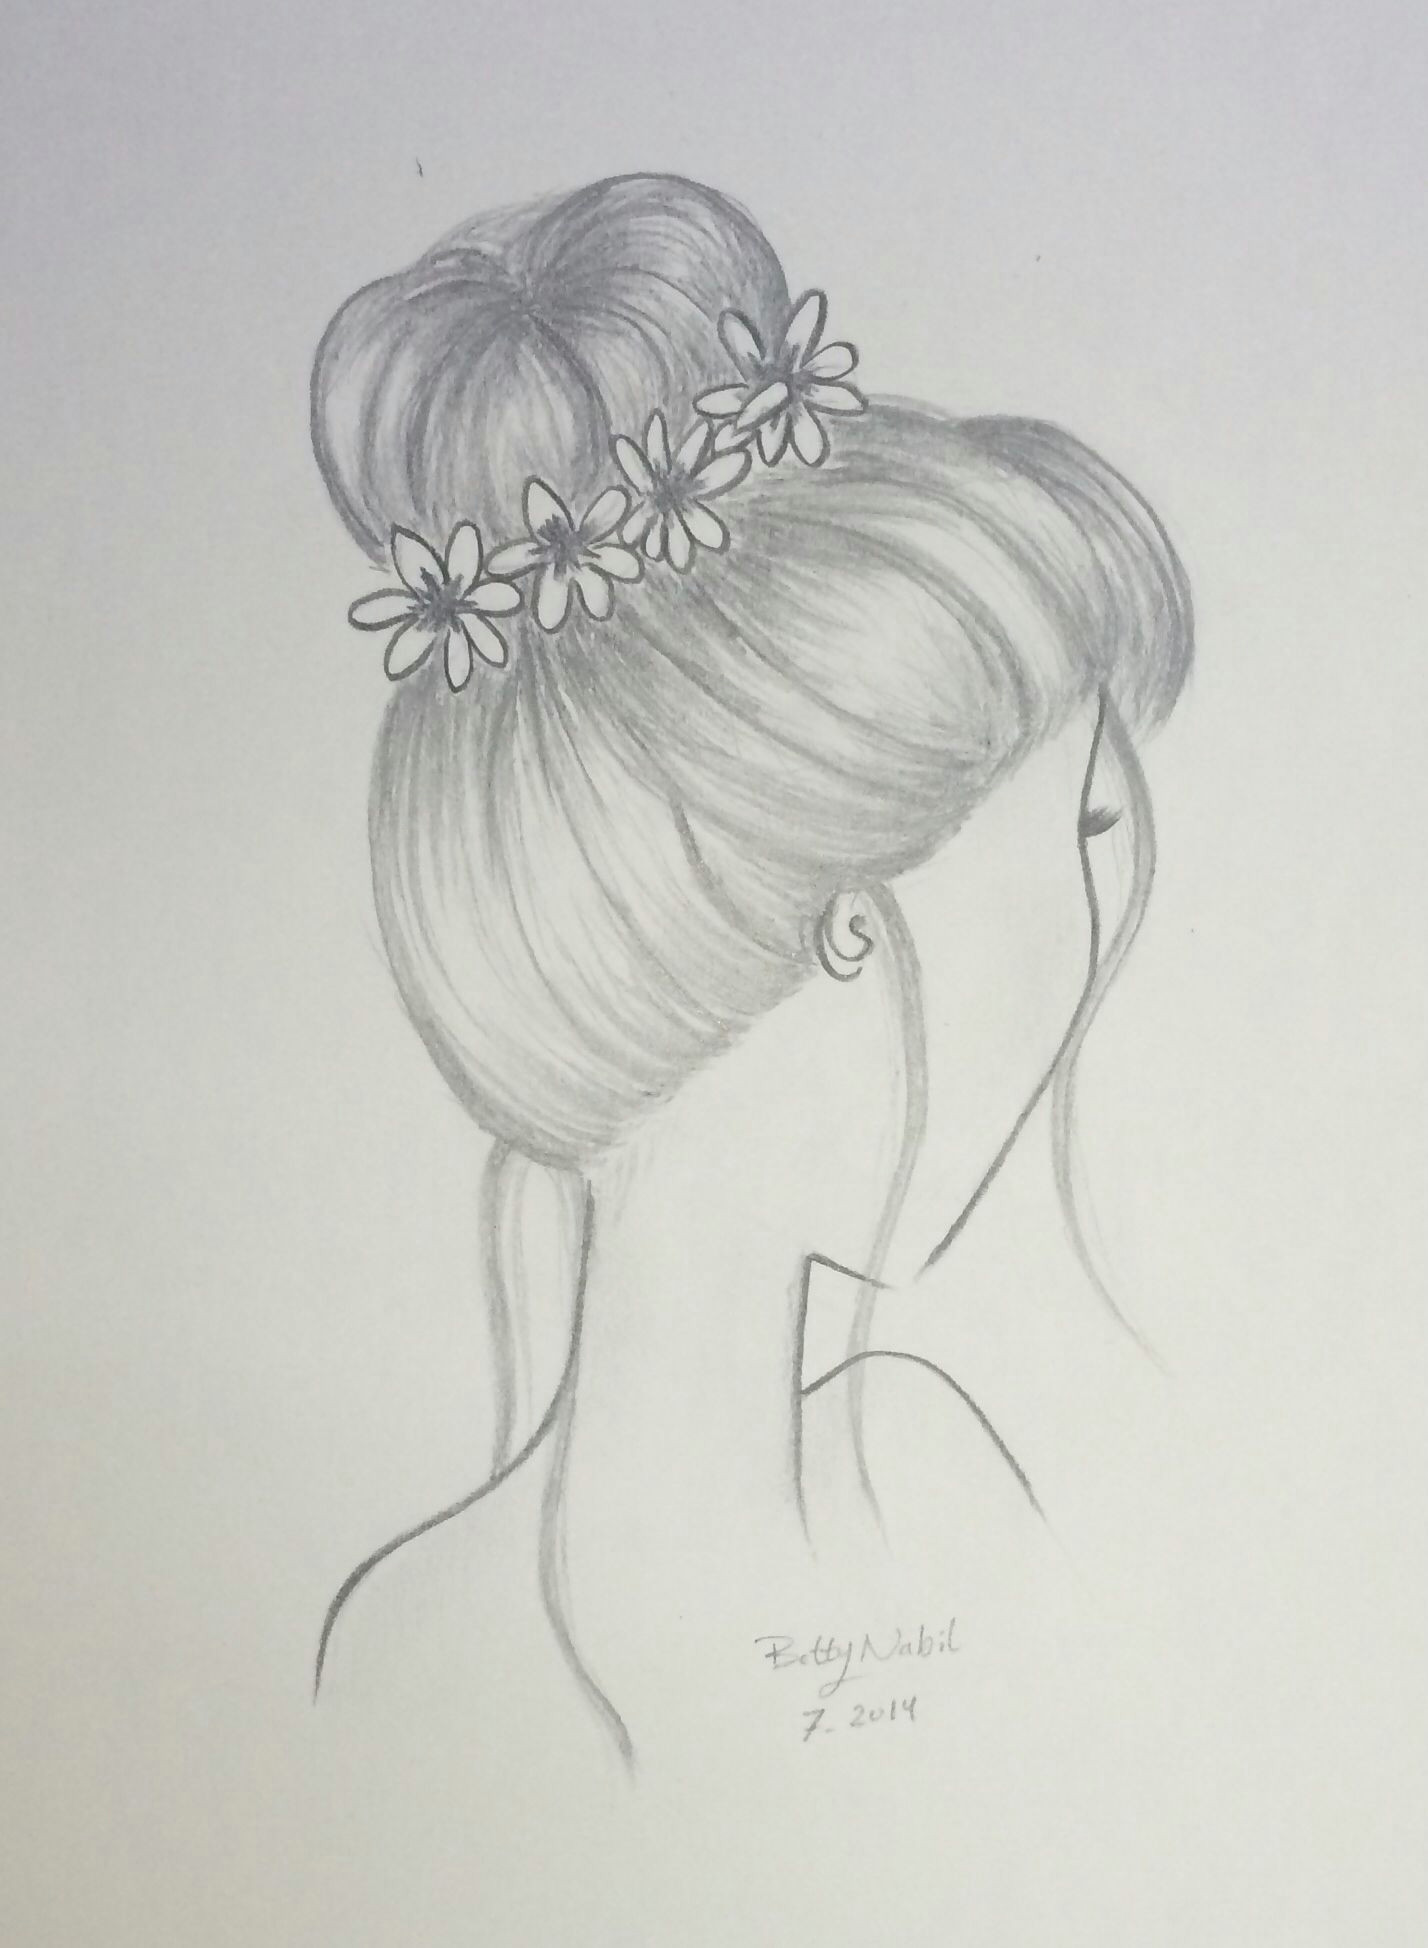 Drawing Of Girl with Bun Draw Hair Bun Hairstyle with Flowers Draw In 2019 Drawings